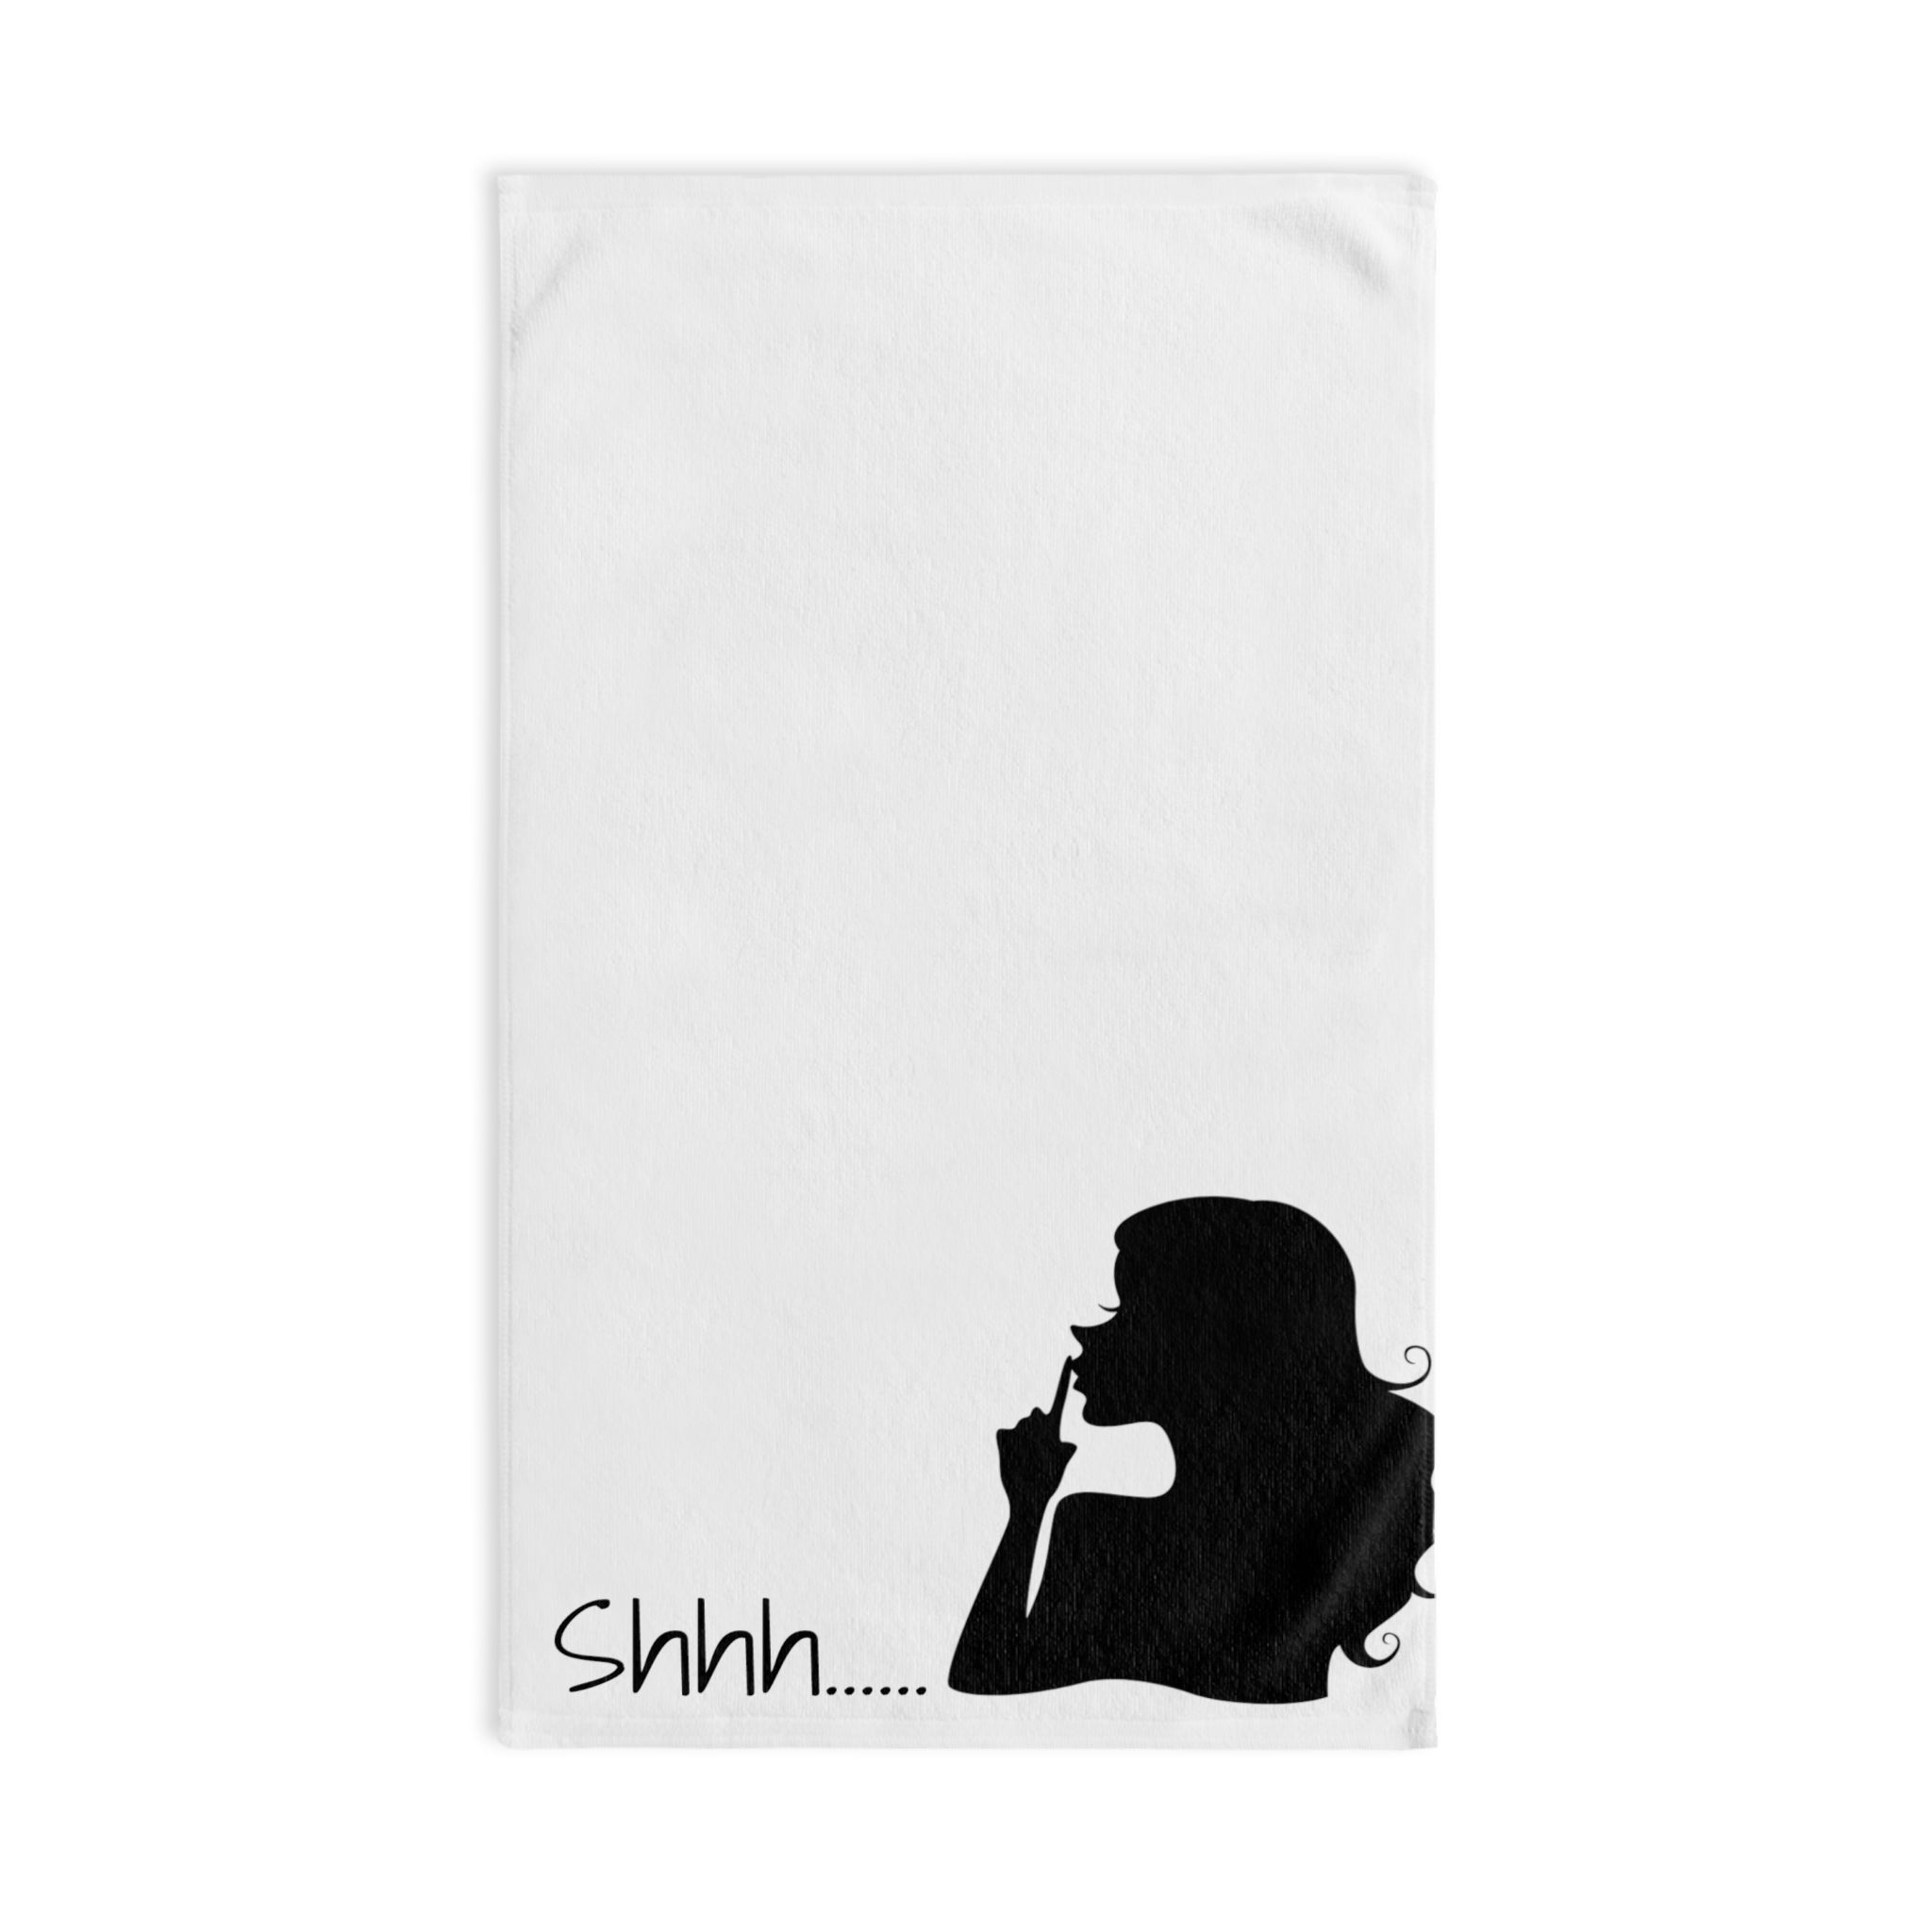 Girl Quiet Black White | Funny Gifts for Men - Gifts for Him - Birthday Gifts for Men, Him, Her, Husband, Boyfriend, Girlfriend, New Couple Gifts, Fathers & Valentines Day Gifts, Christmas Gifts NECTAR NAPKINS